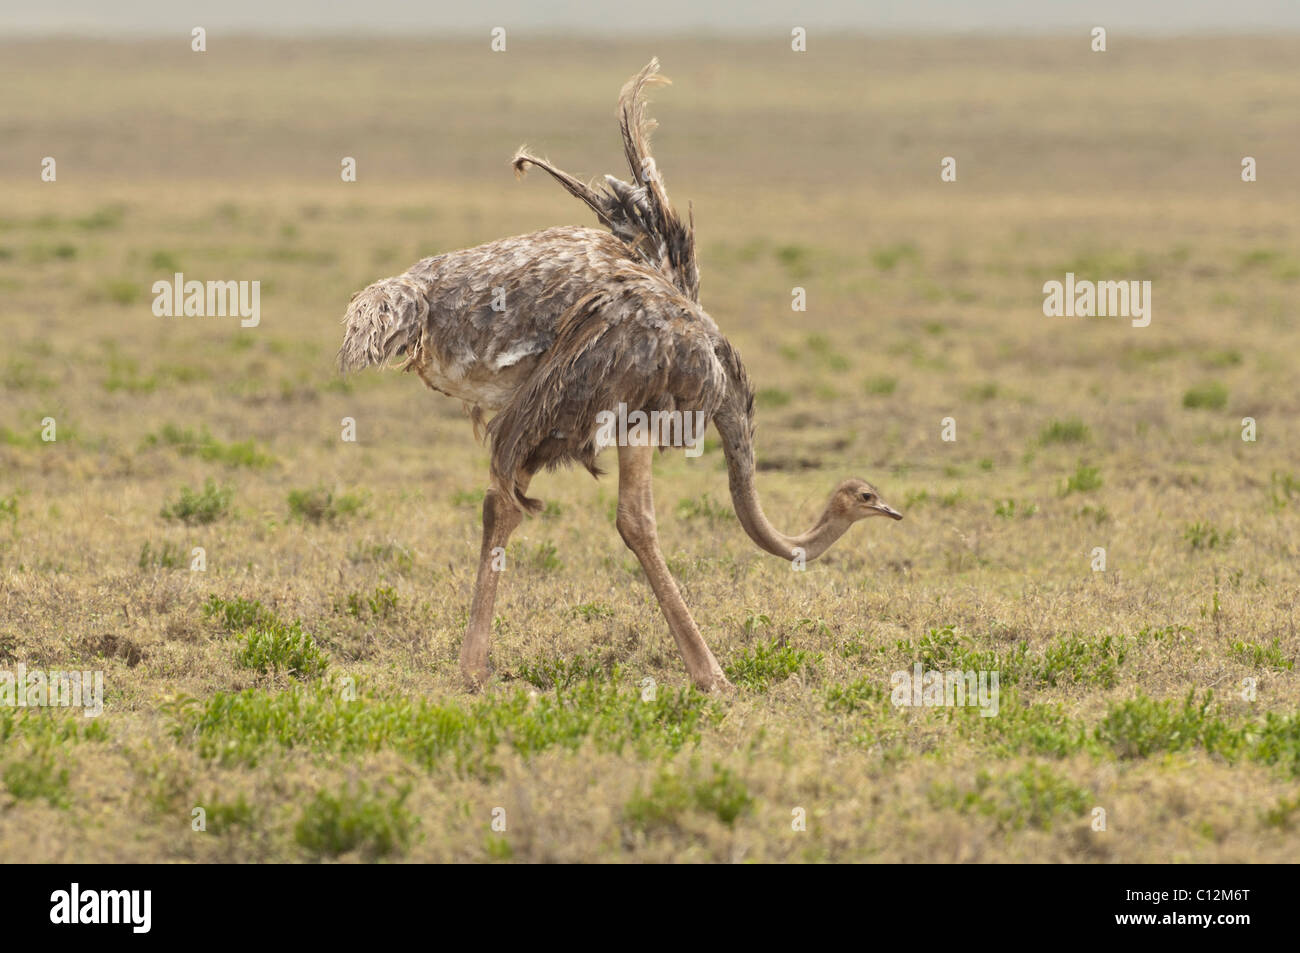 Stock photo of a female Masai ostrich displaying a breeding dance. Stock Photo